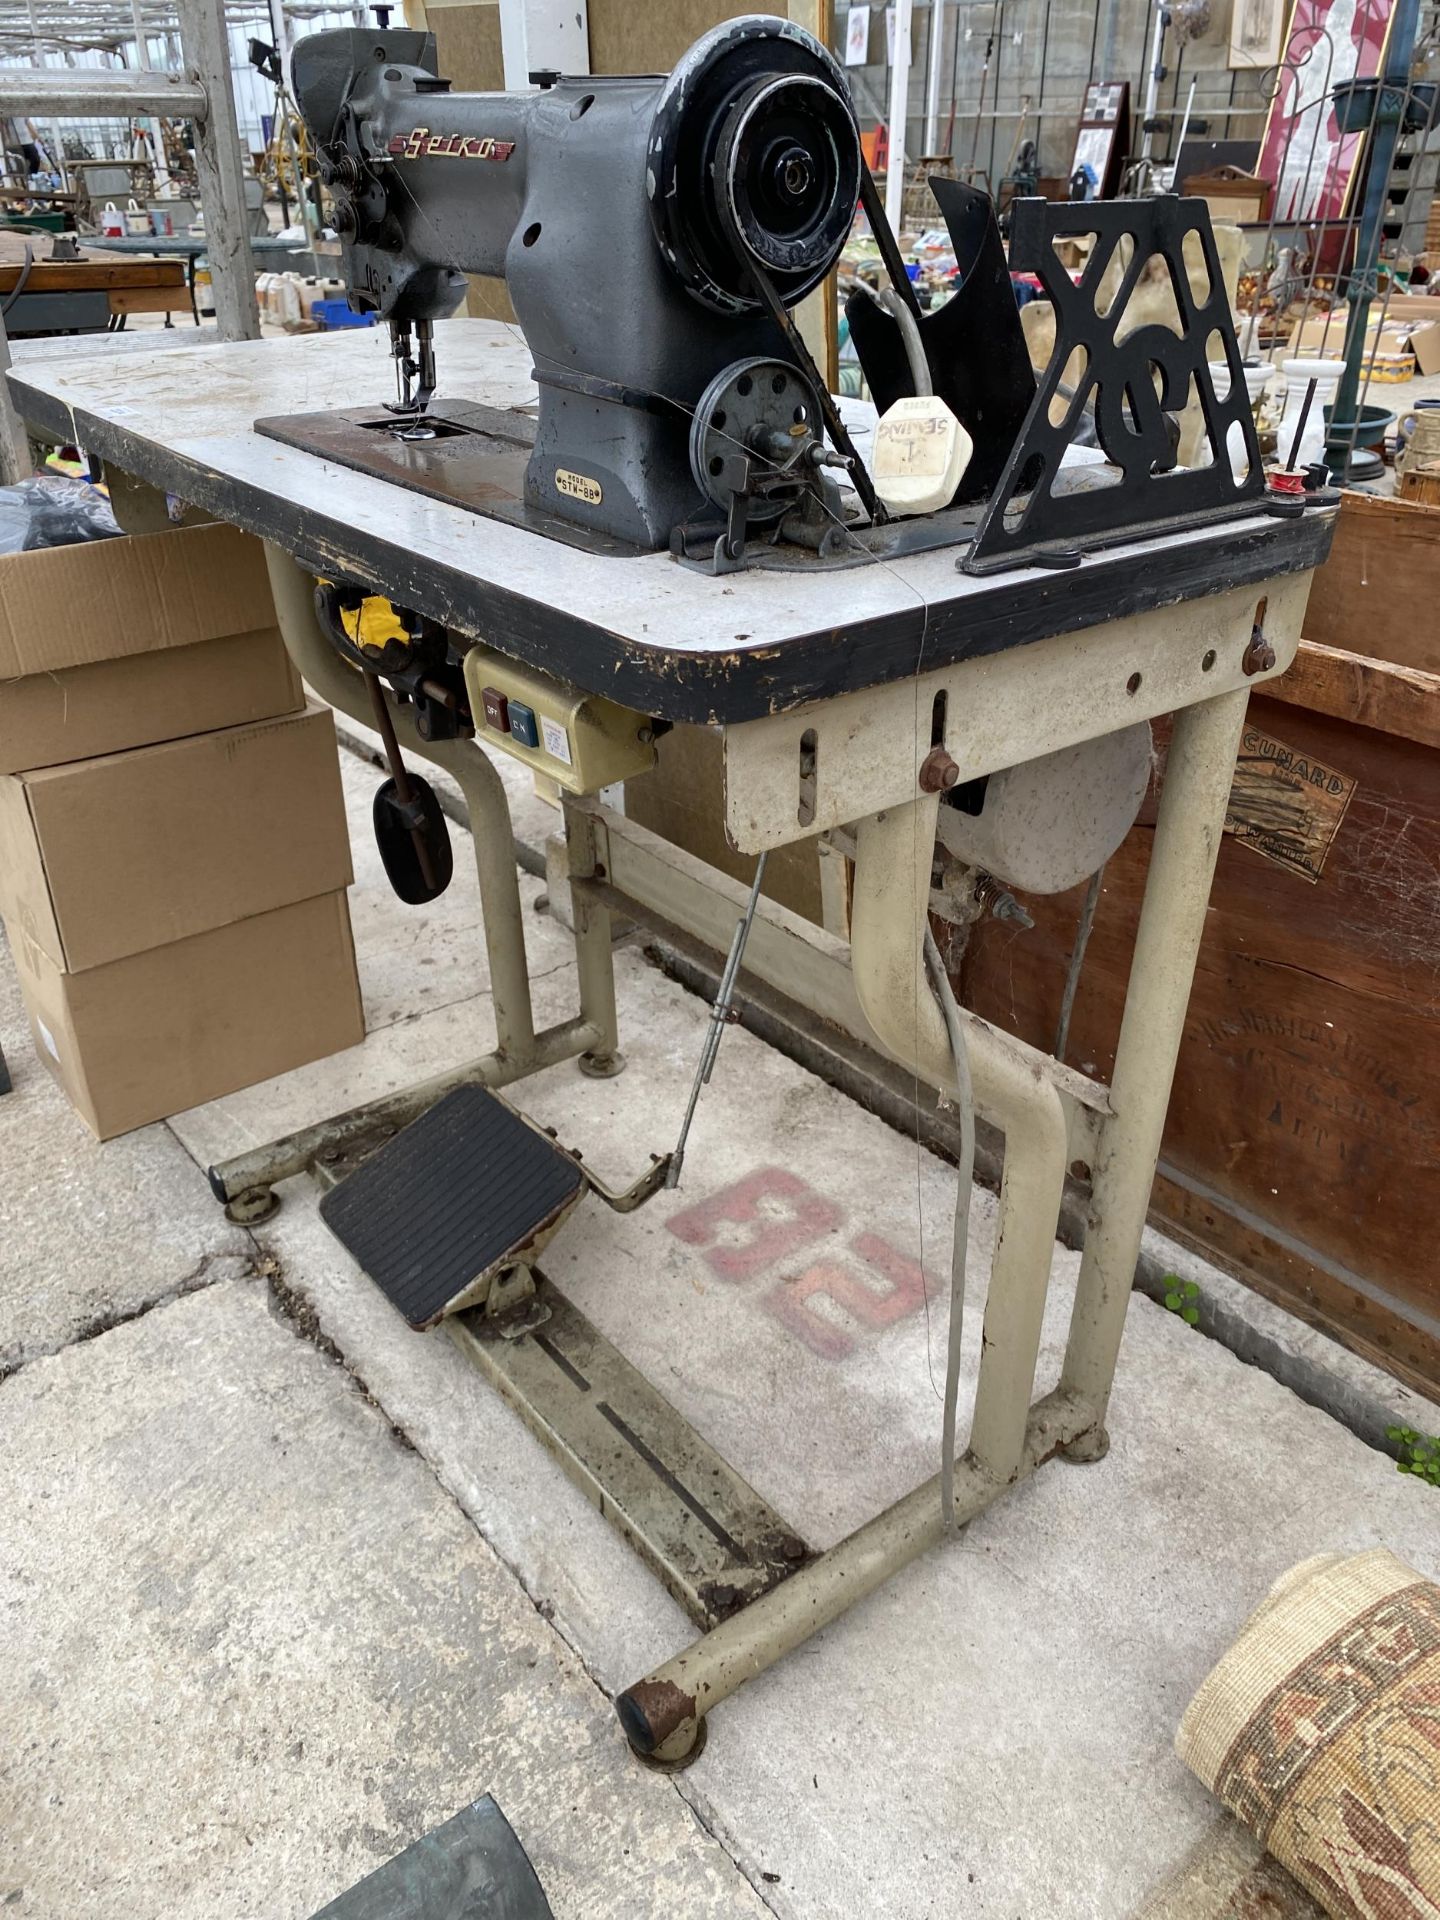 A SEIKO INDUSTRIAL SEWING MACHINE WITH TREADLE BASE - Image 5 of 5